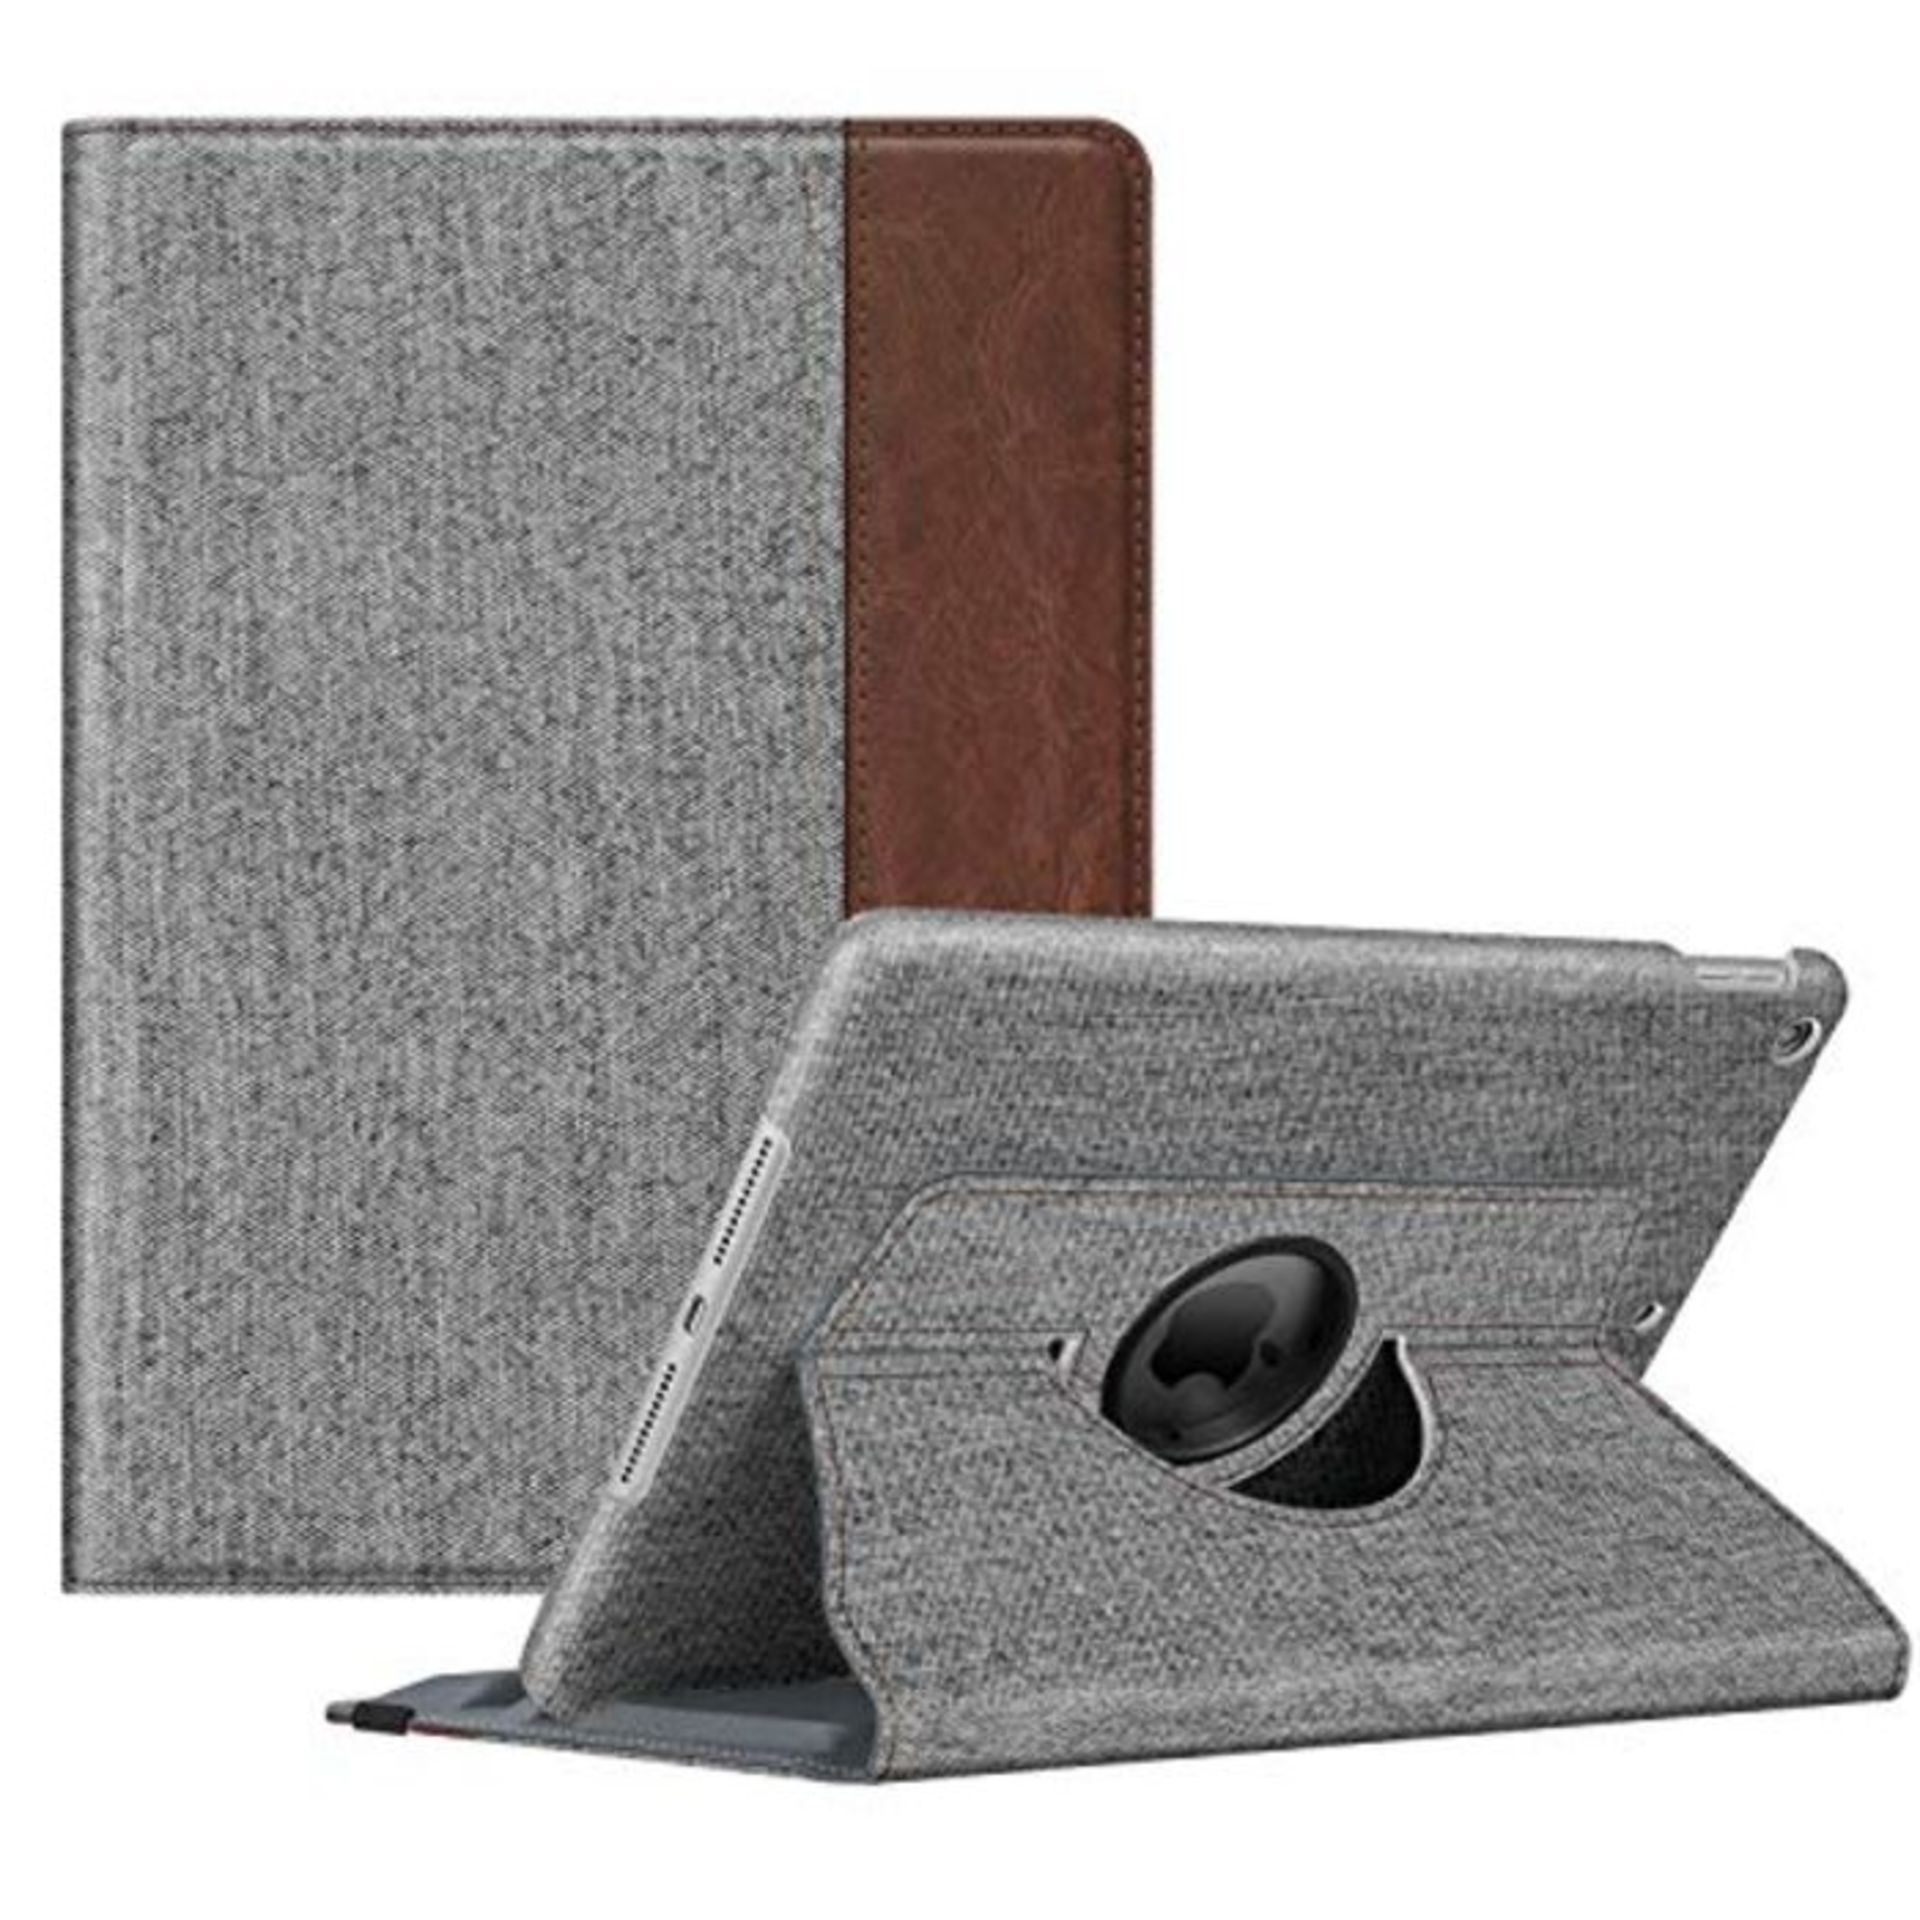 FINTIE Case for New iPad 10.2" 8th Generation 2020 / 7th Generation 2019, 360 Degree S